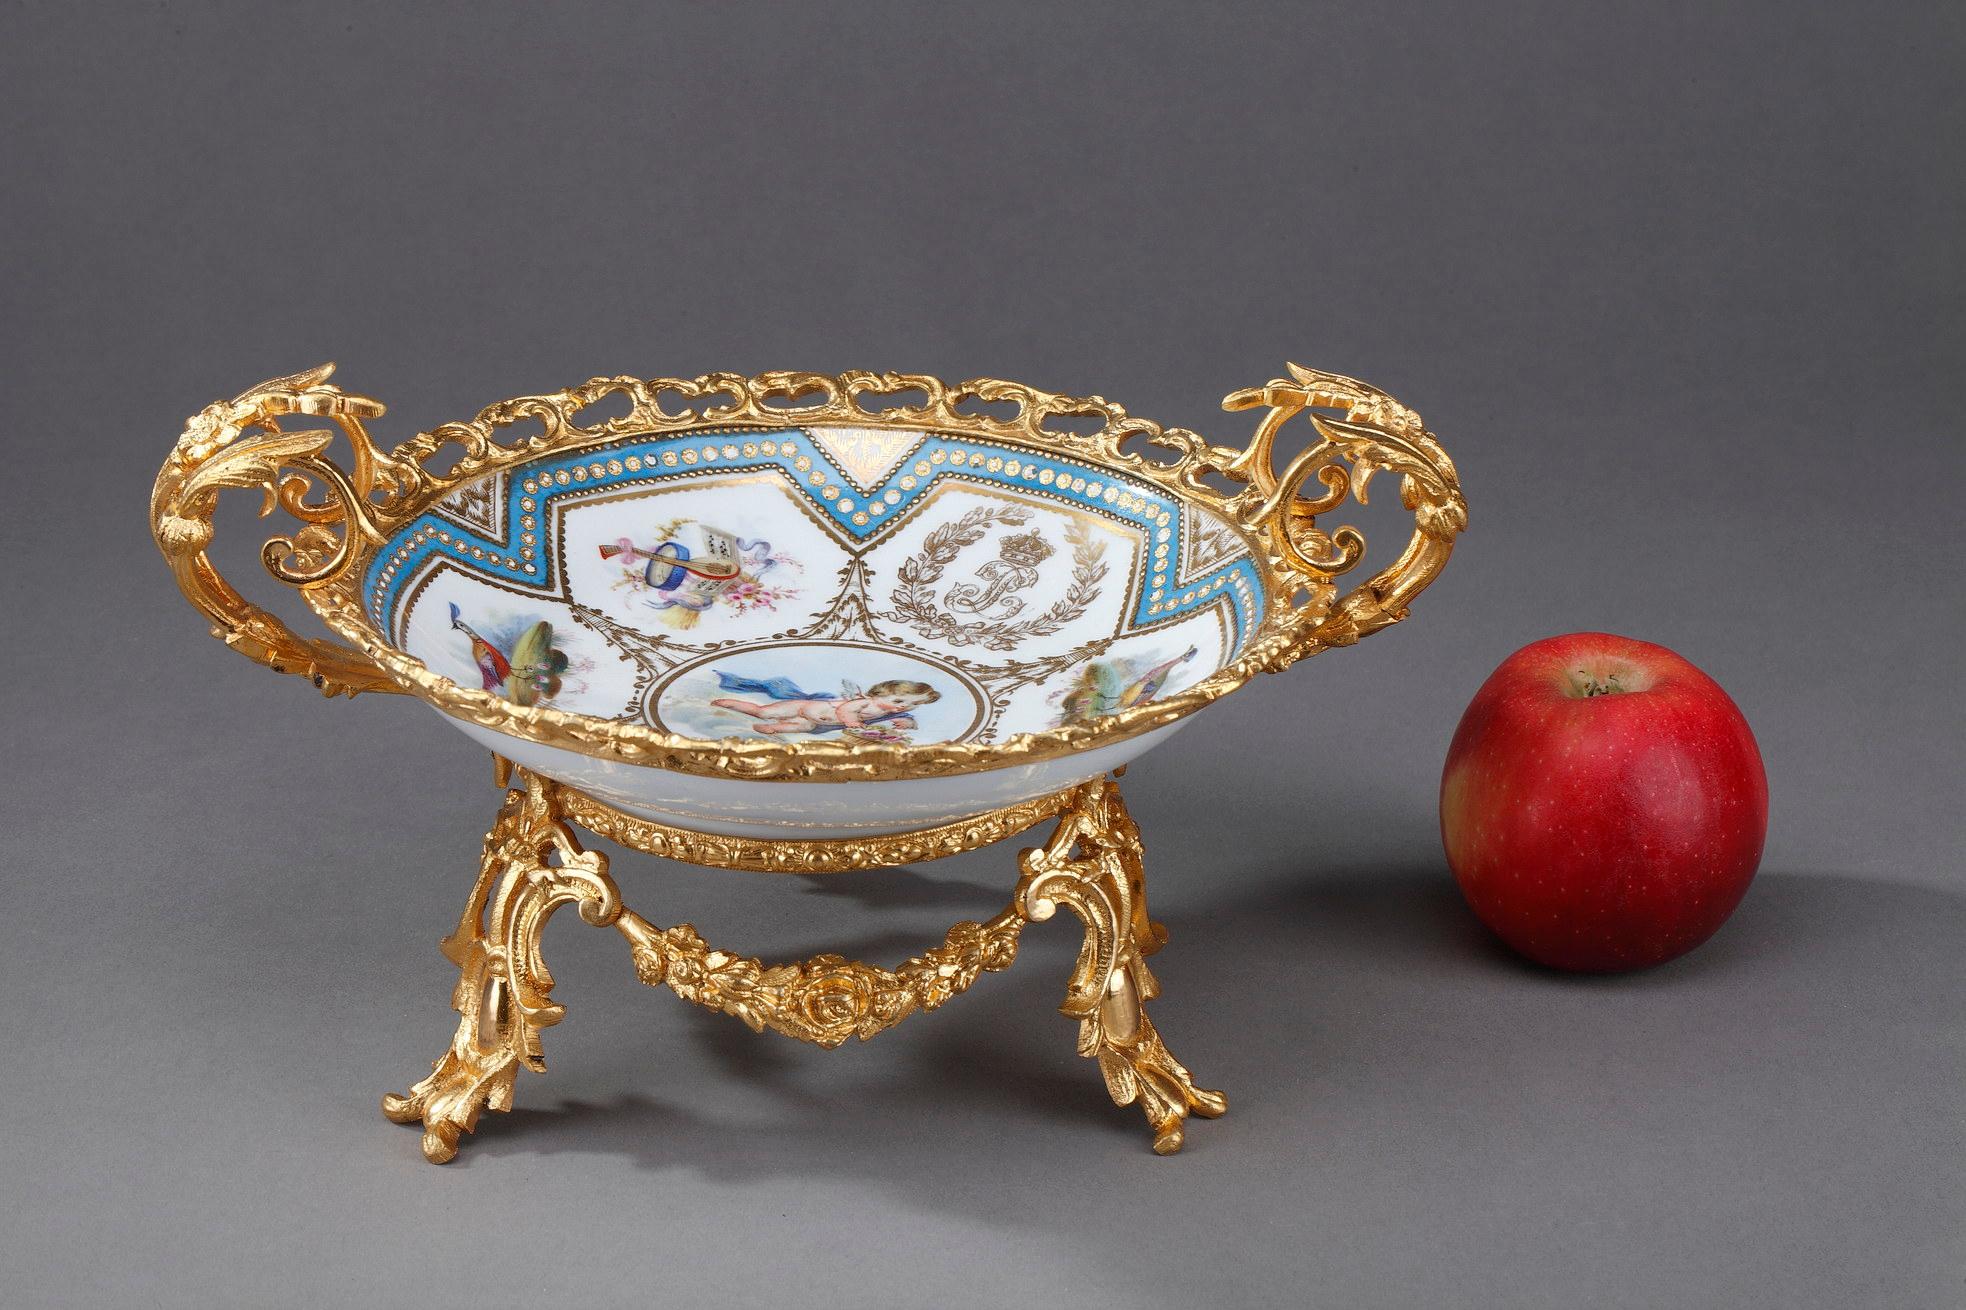 Sevres porcelain bowl with a gilded bronze mount. It is decorated with a winged and draped cupid seated on a cloud surrounded by bouquets of flowers, an allegory of the gardener, an allegory of music and the mark of King Louis-Philippe surmounted by